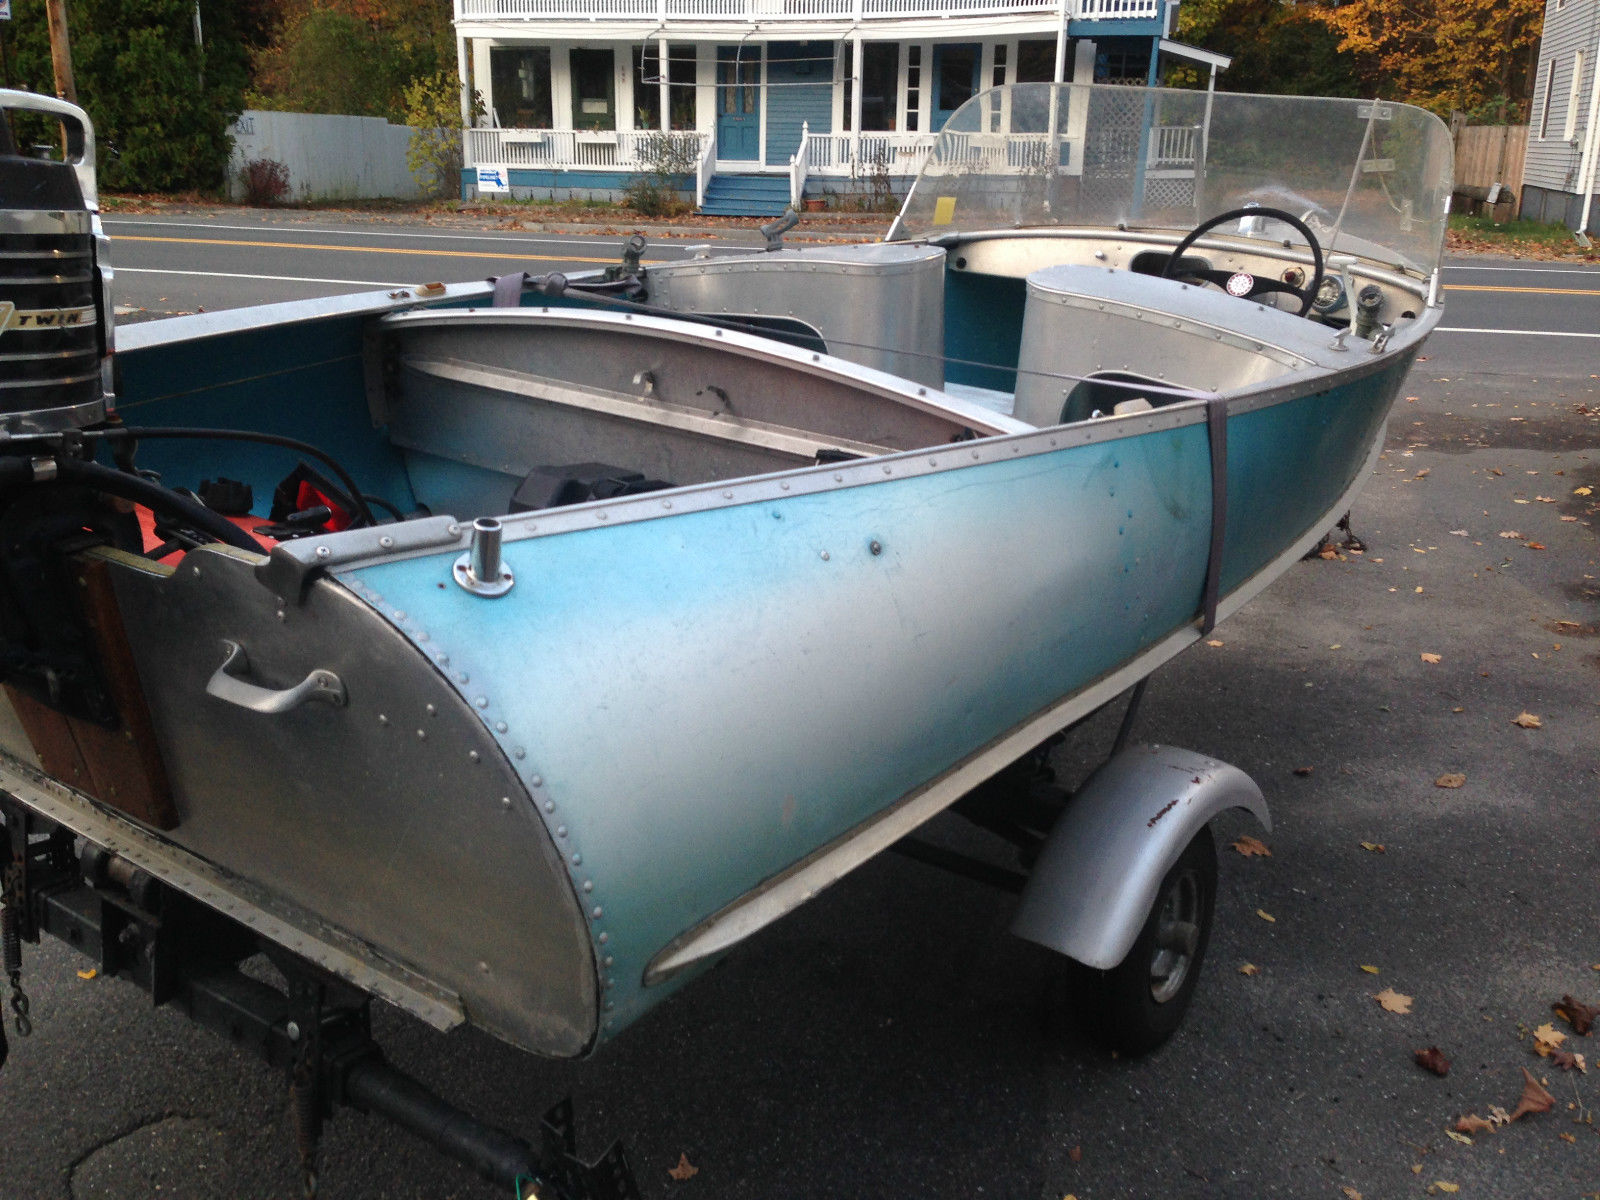 feather craft ranger 1957 for sale for $1,200 - boats-from